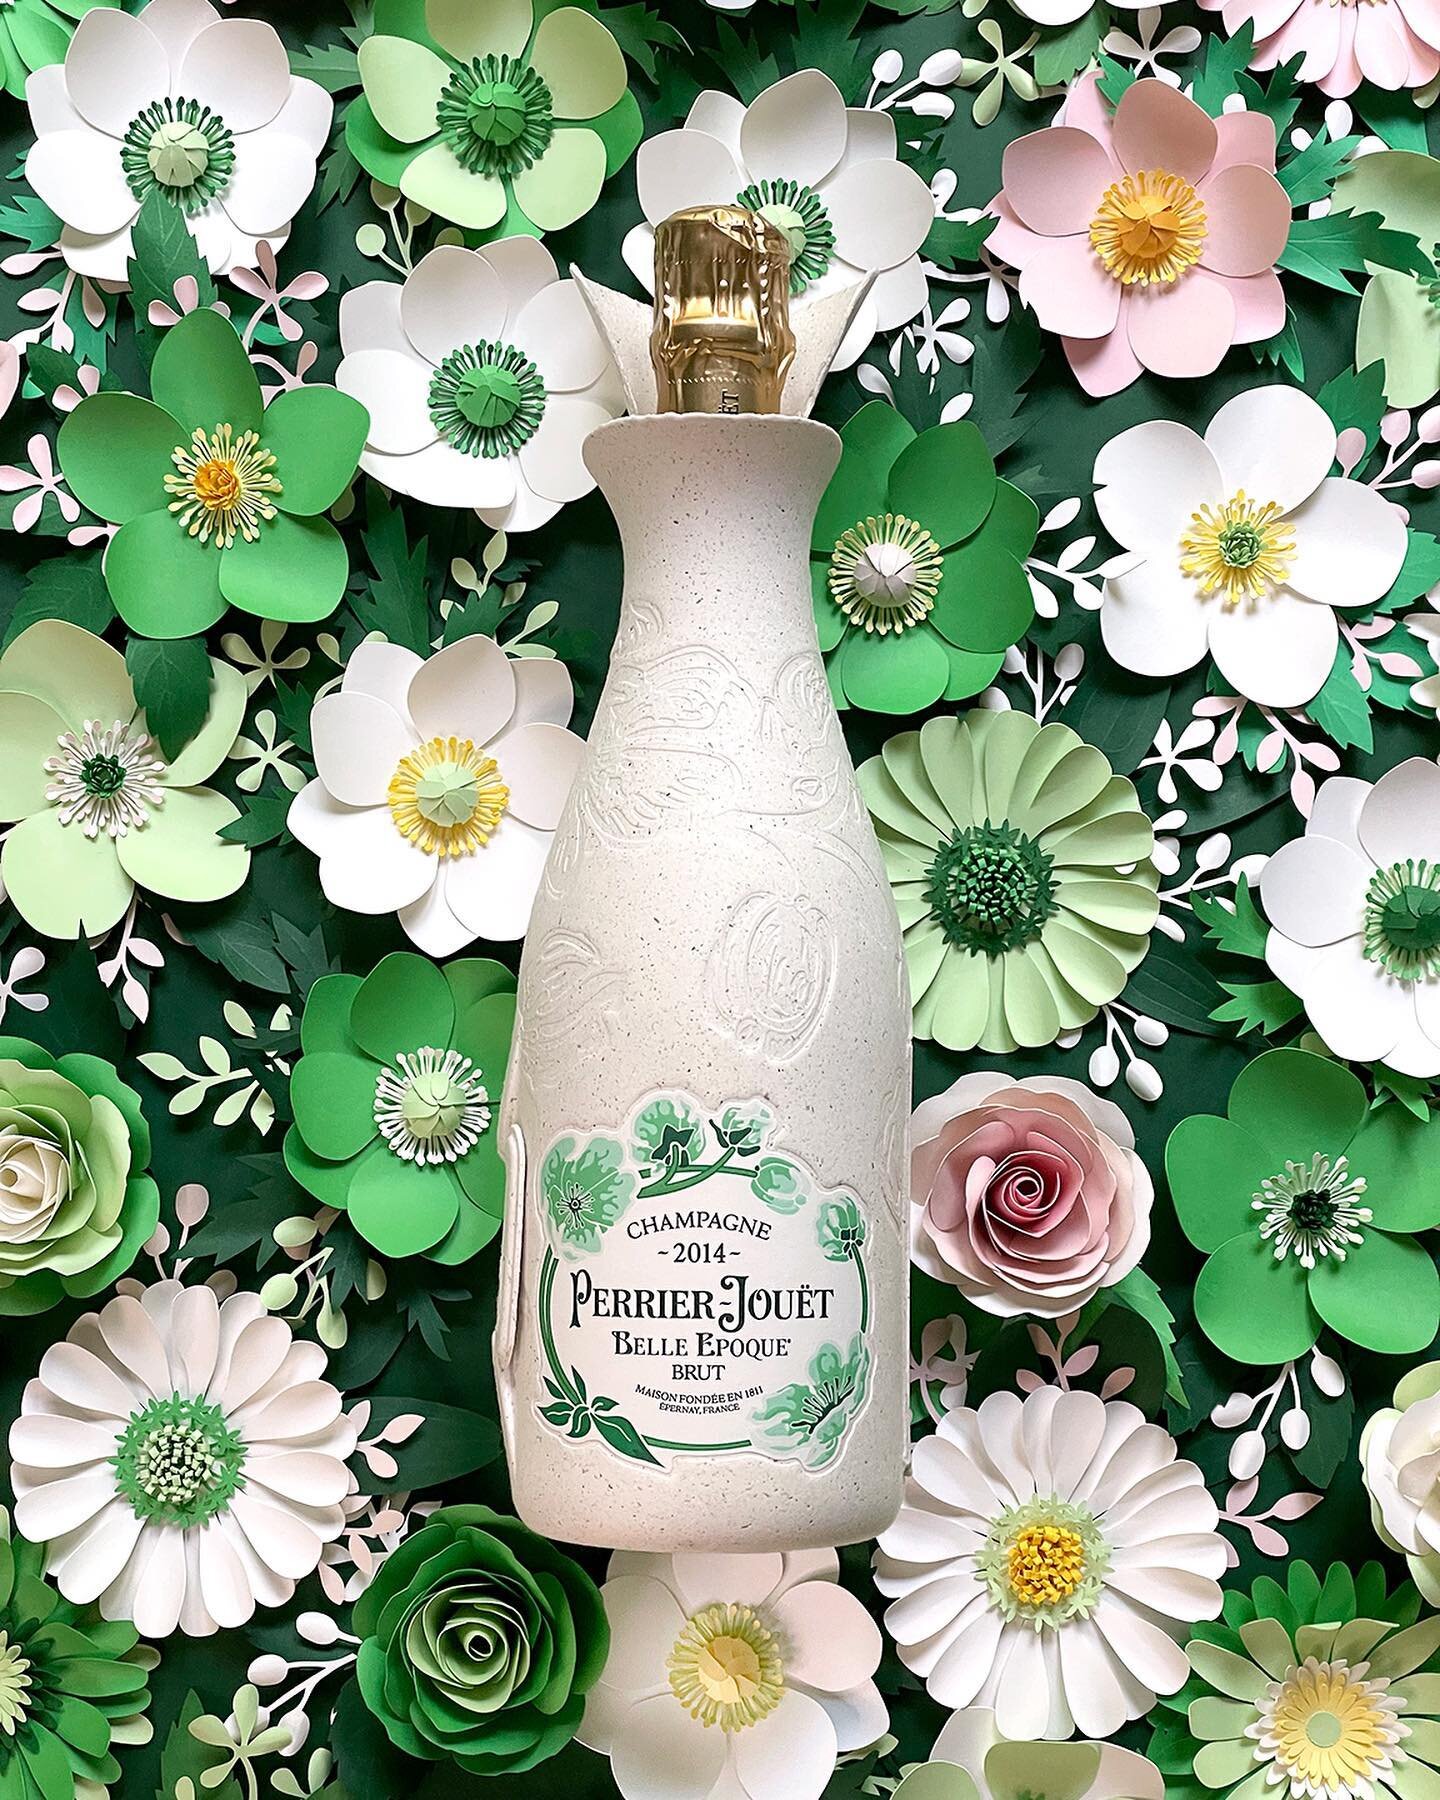 So excited to work with @PerrierJouet for the unveiling of their Belle Epoque Cocoon! Each paper anemone adorning the Cocoon has a unique color combination, and there are a variety of other paper flowers too.

The Perrier-Jou&euml;t Belle Epoque Coco